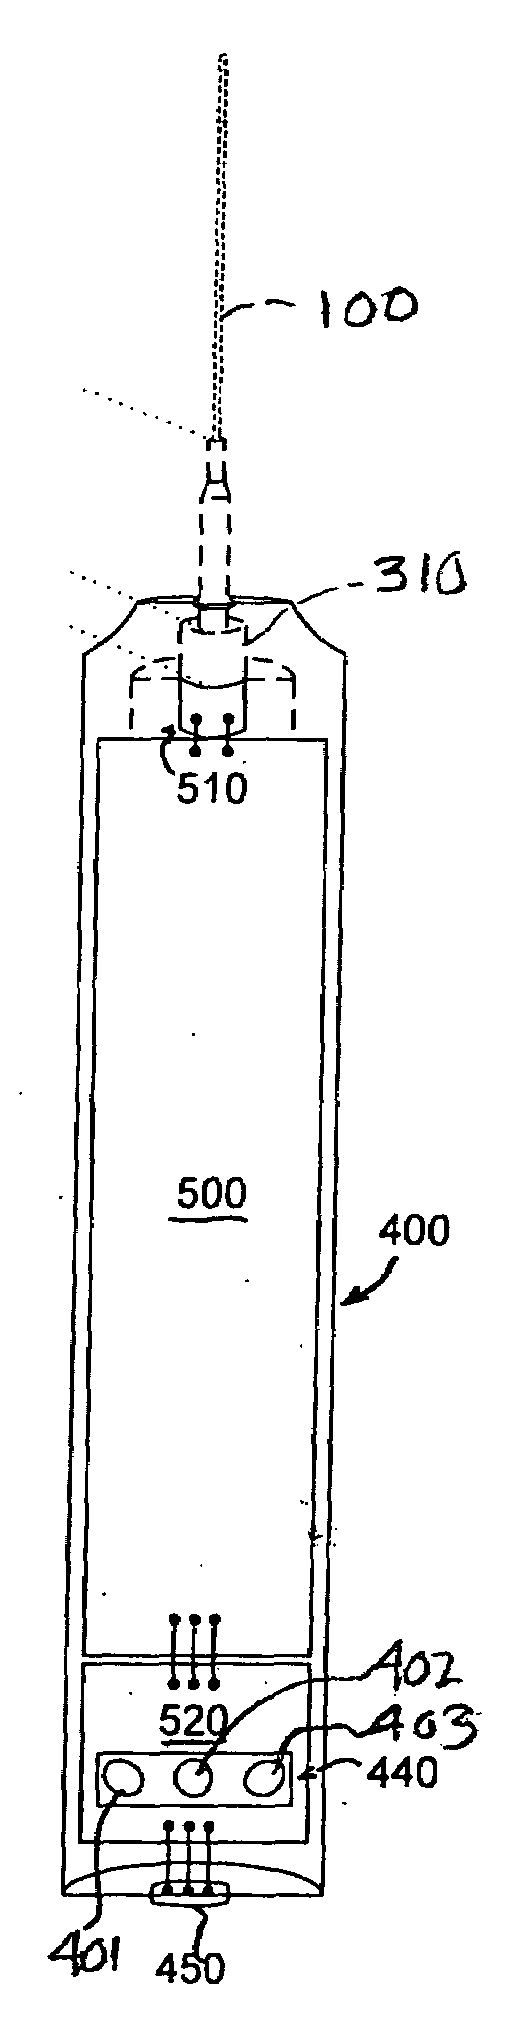 Acoustic device for needle placement into a joint